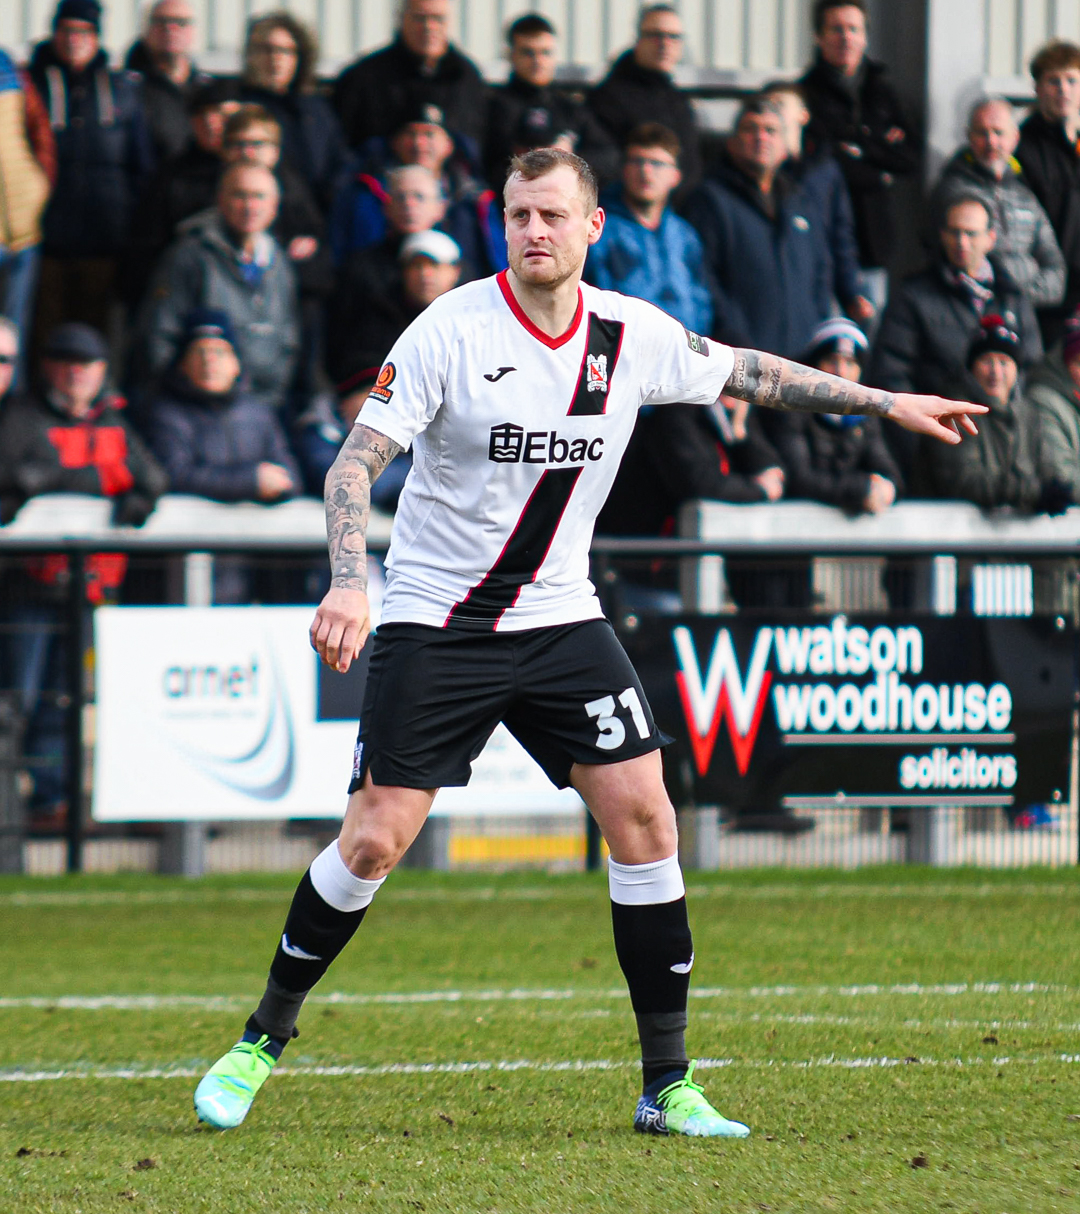 After leaving Darlington, David Wheater declared his retirement from football at the age of 36. - News - Darlington Football Club